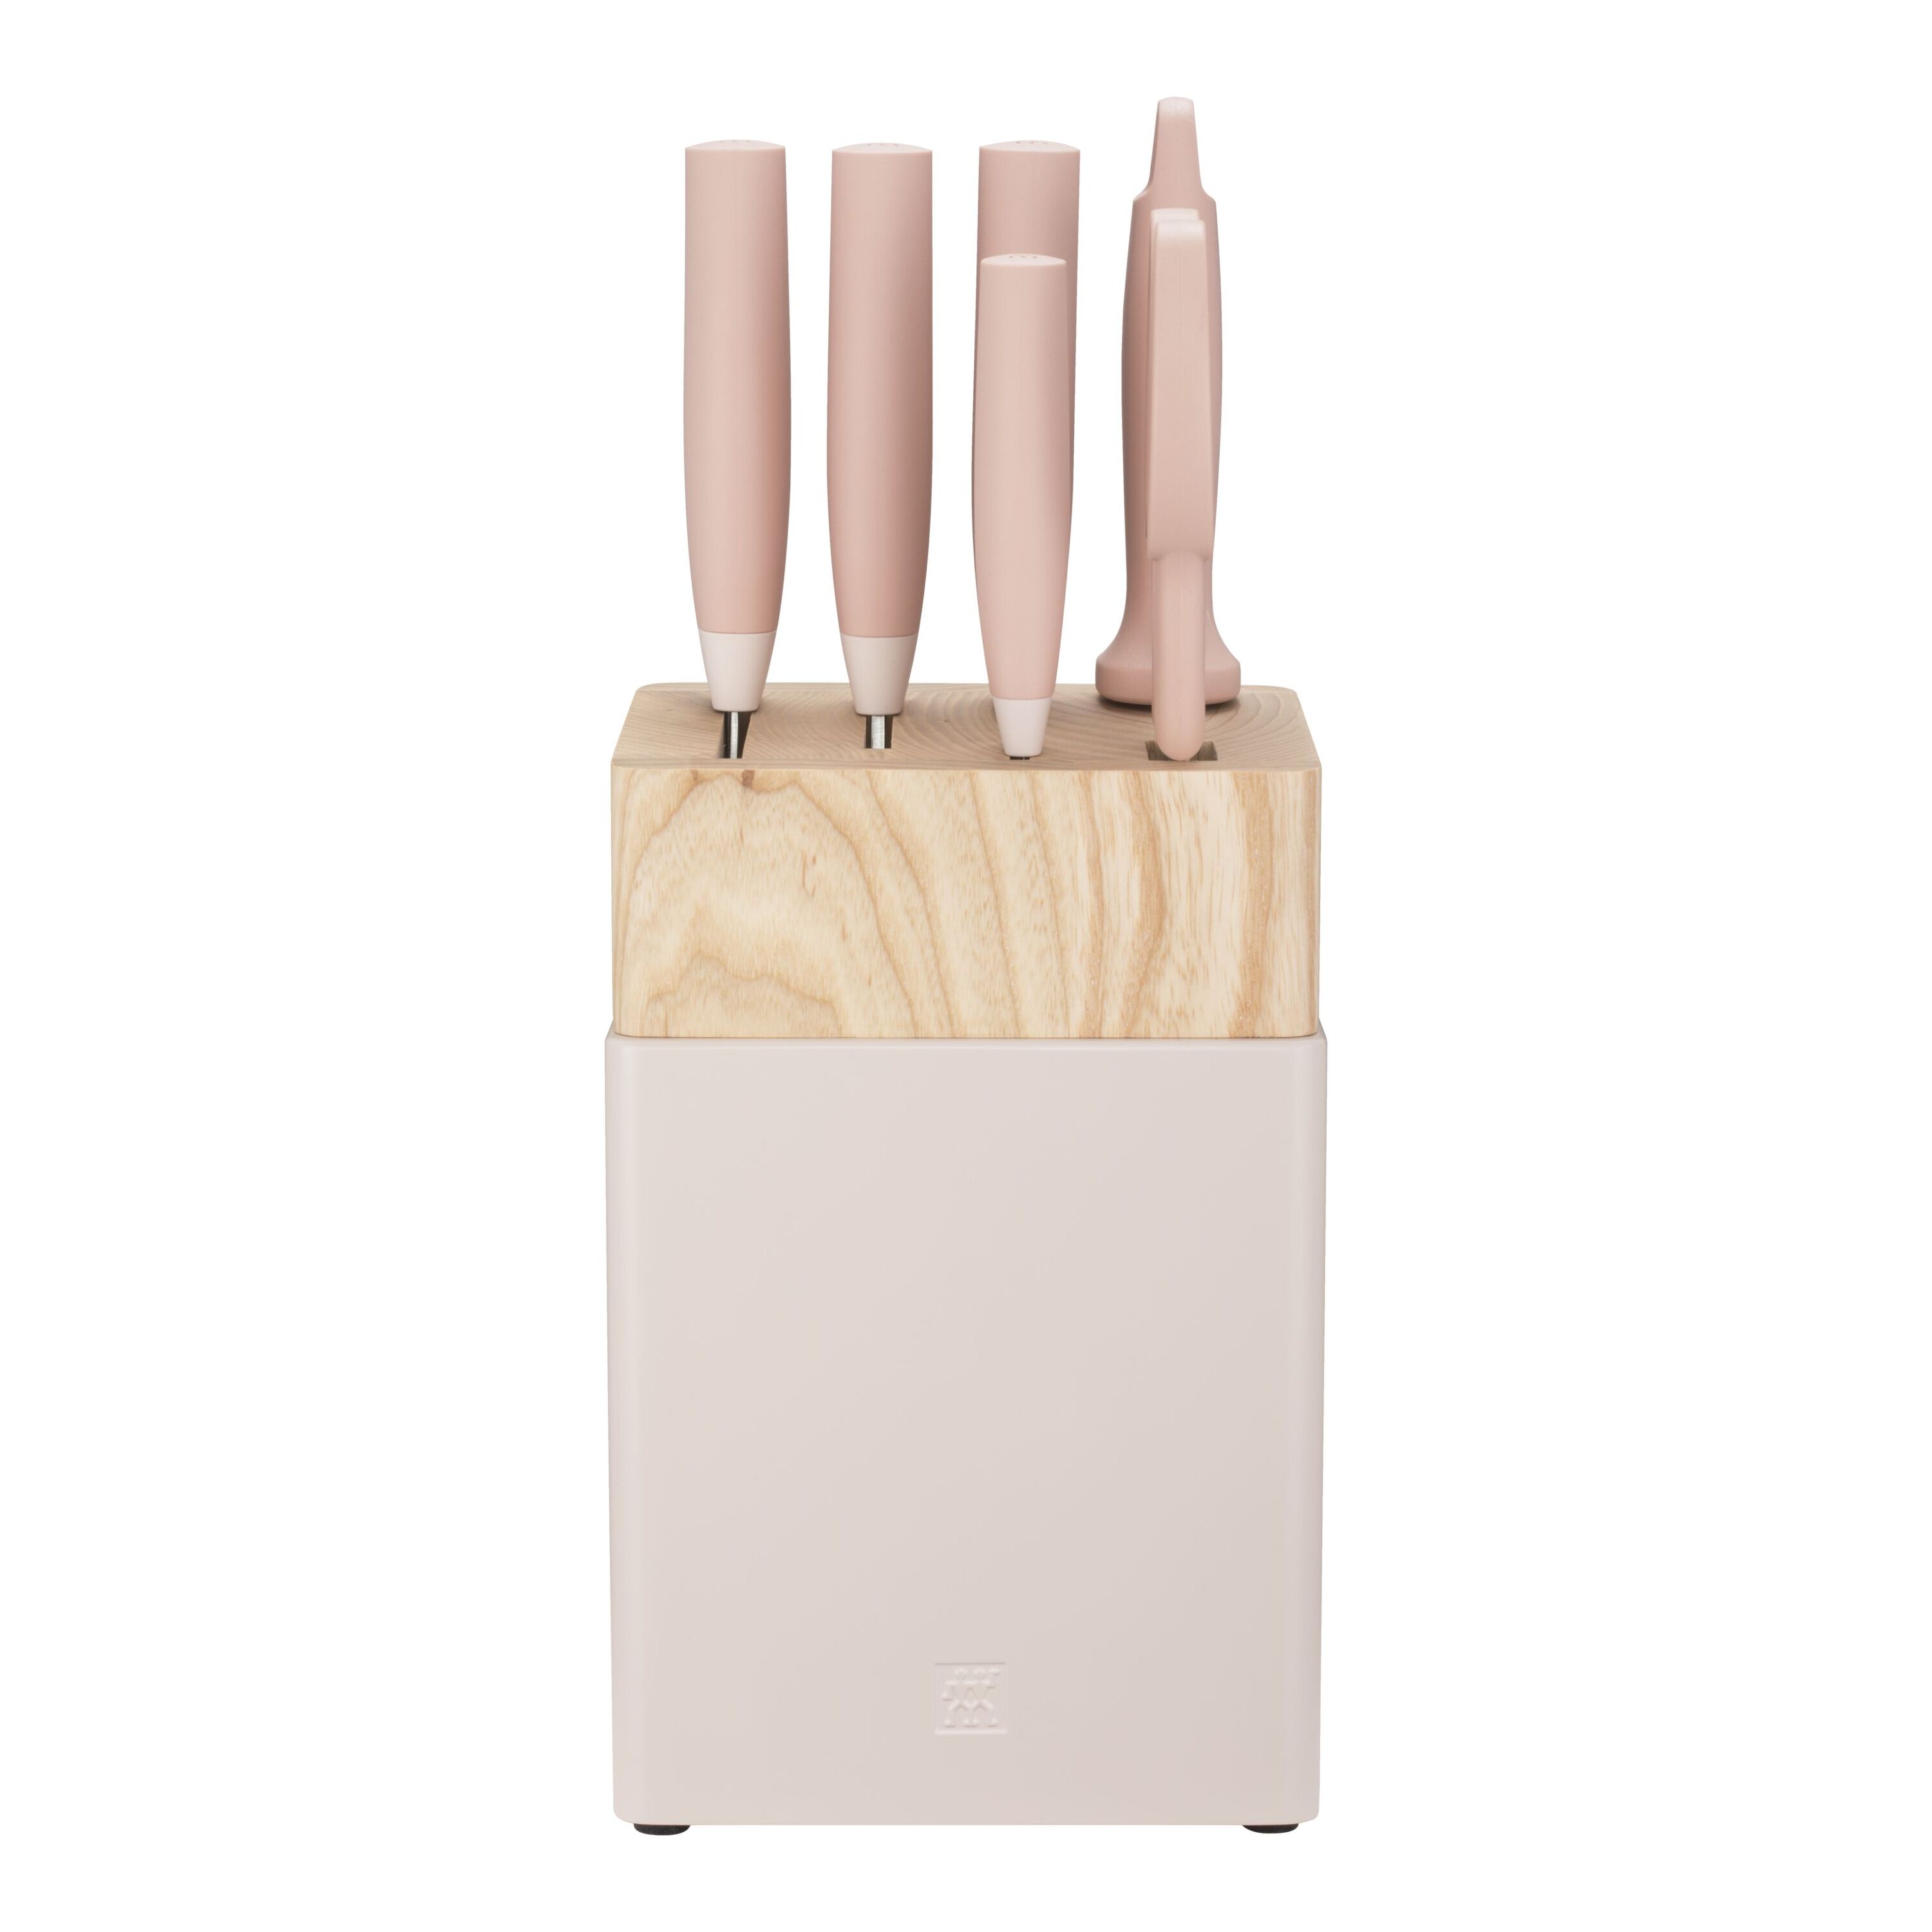 ZWILLING Now S Knife Block Set 